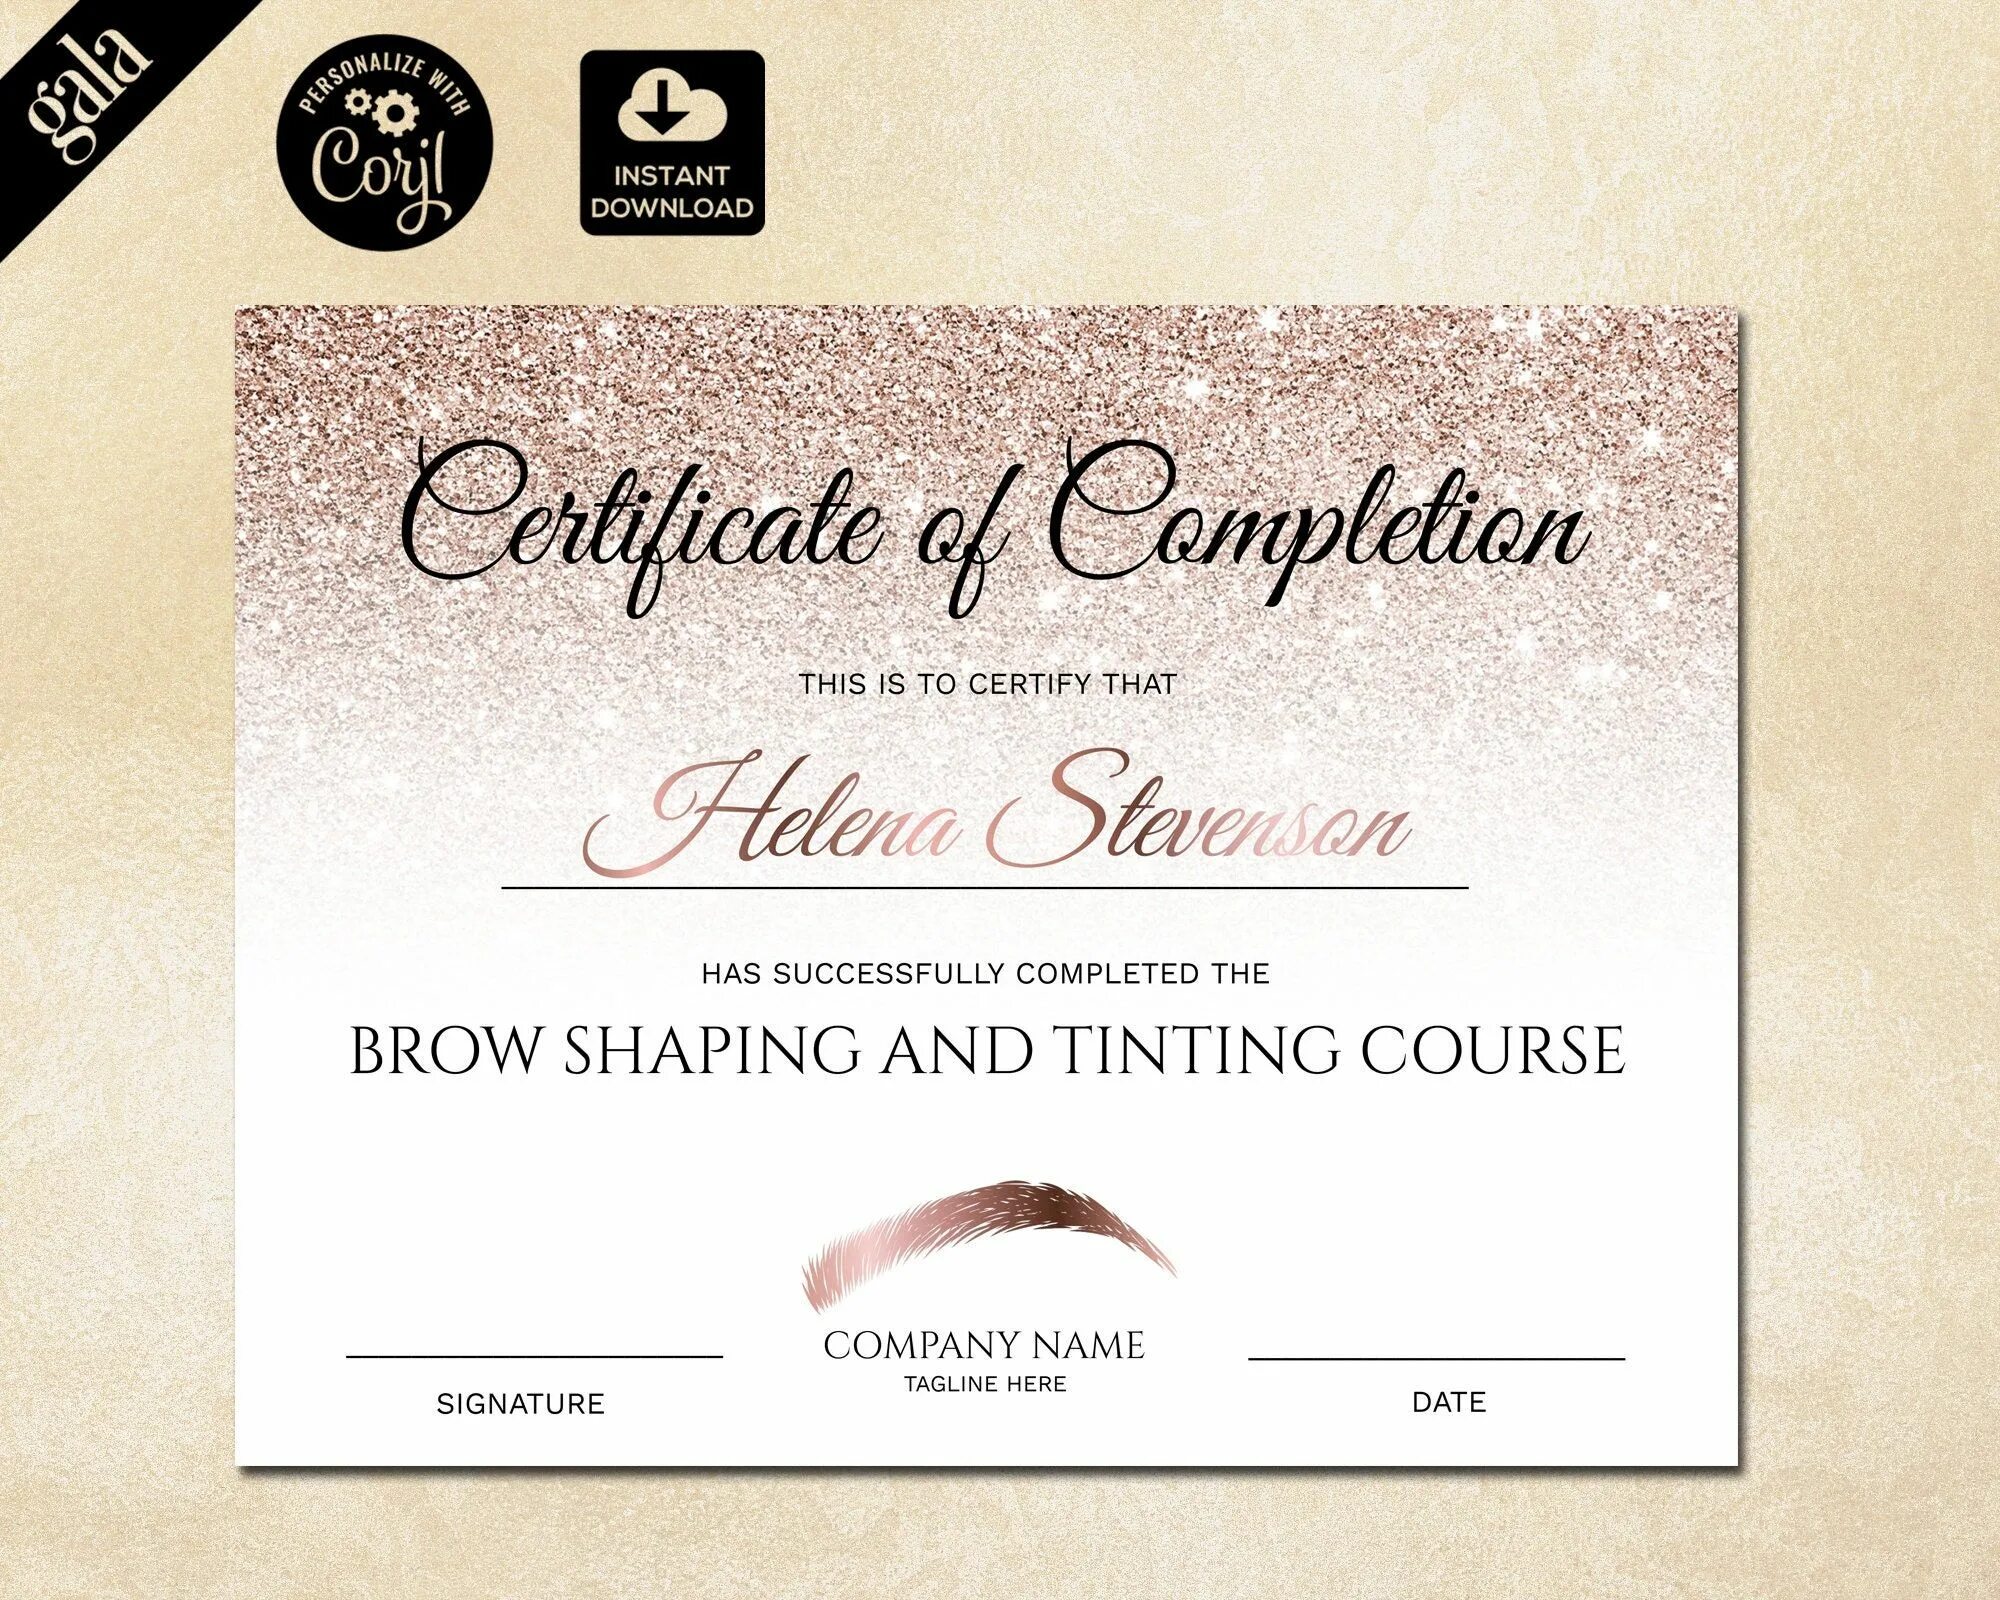 Made certificate. Сертификат make up. Сертификат дизайн. Certificate Lashes. Certificate of completion Makeup.